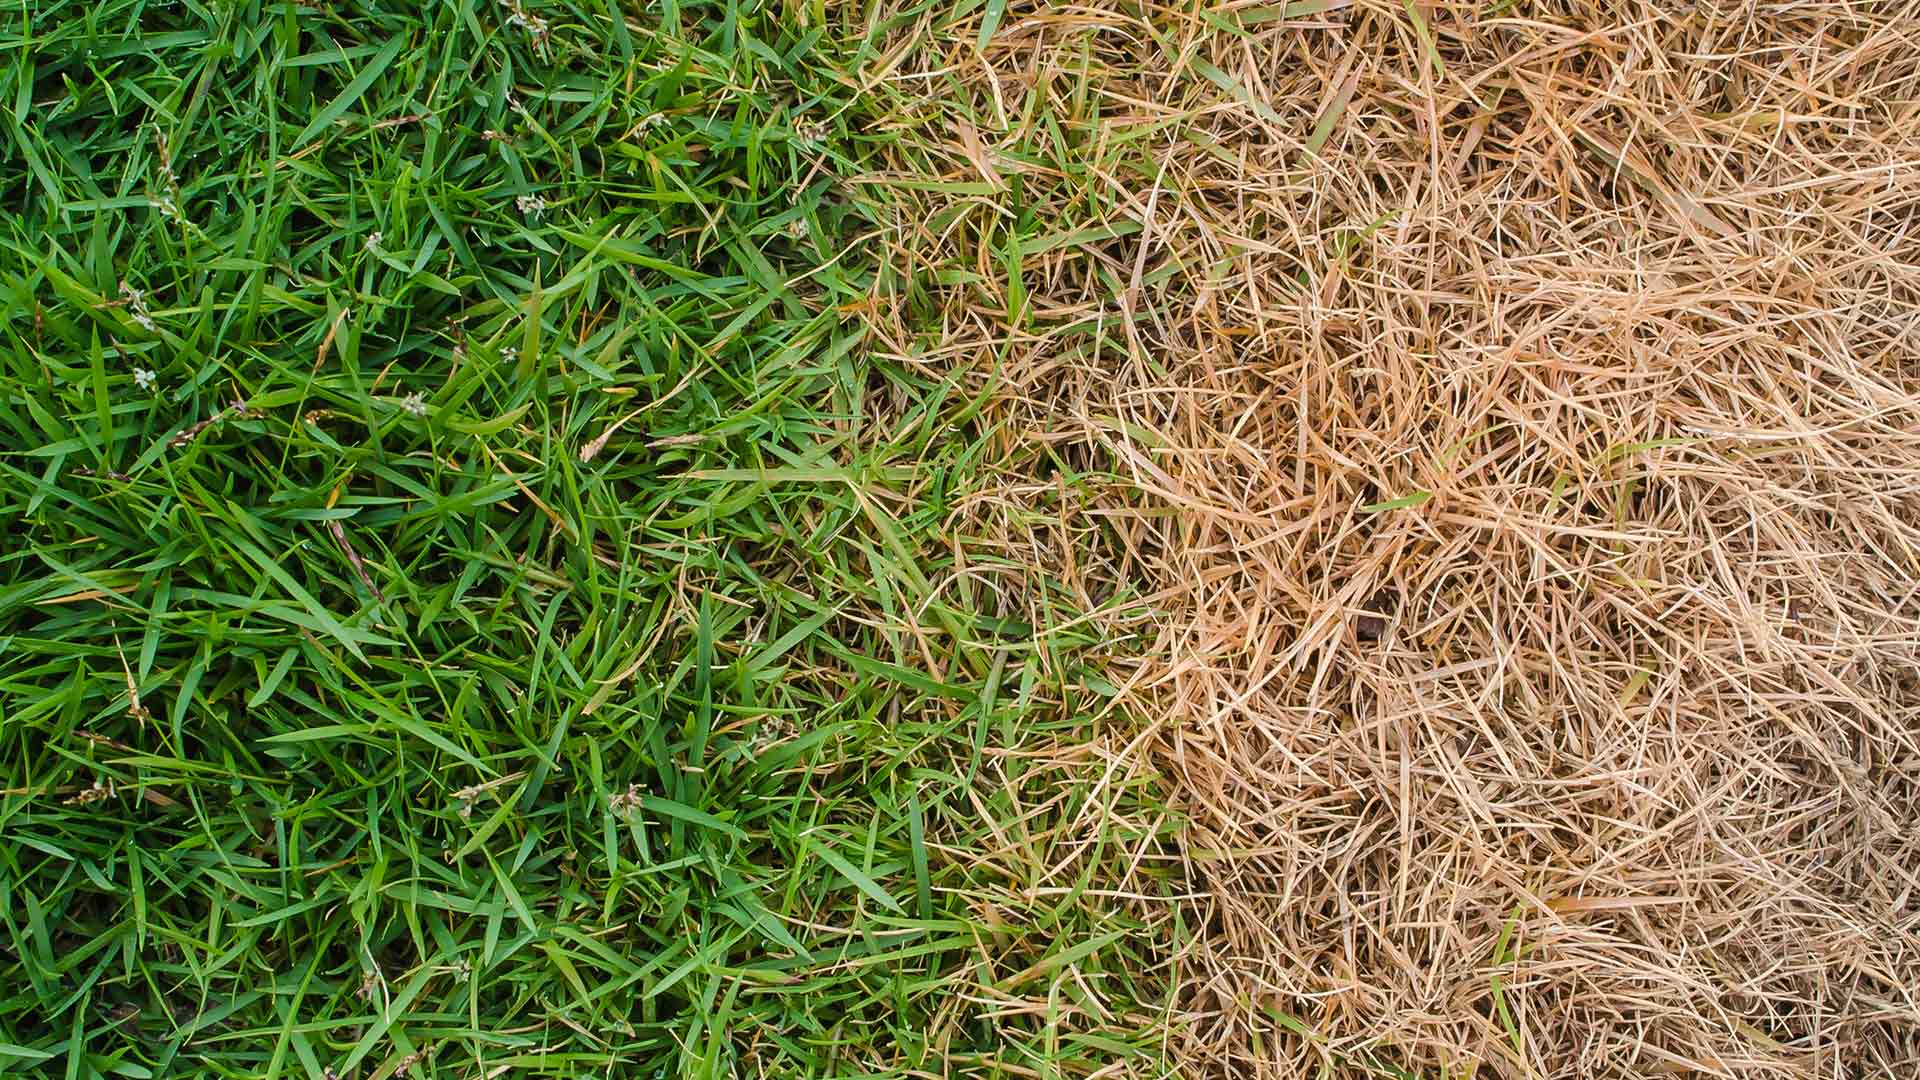 Fertilizing Your Own Lawn Can Be a Big Mistake - Always Hire Pros!